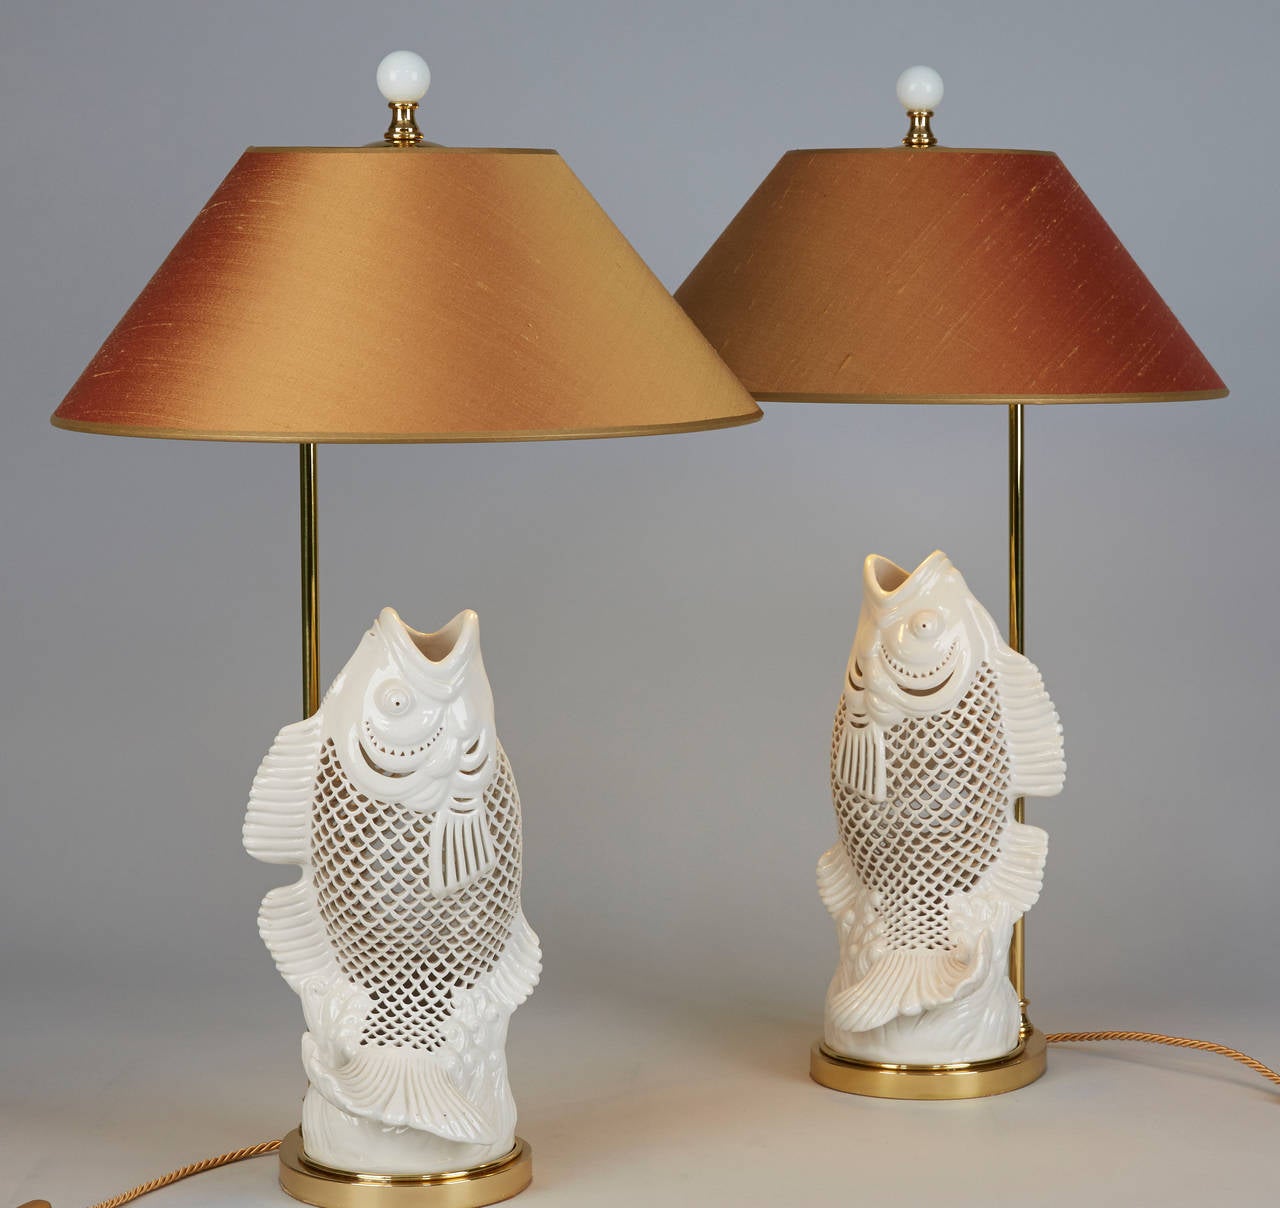 Pair of Table lamps  carved Porcelain Carp.
New mounted on brass base golden Silk shades.
Measurement including shade